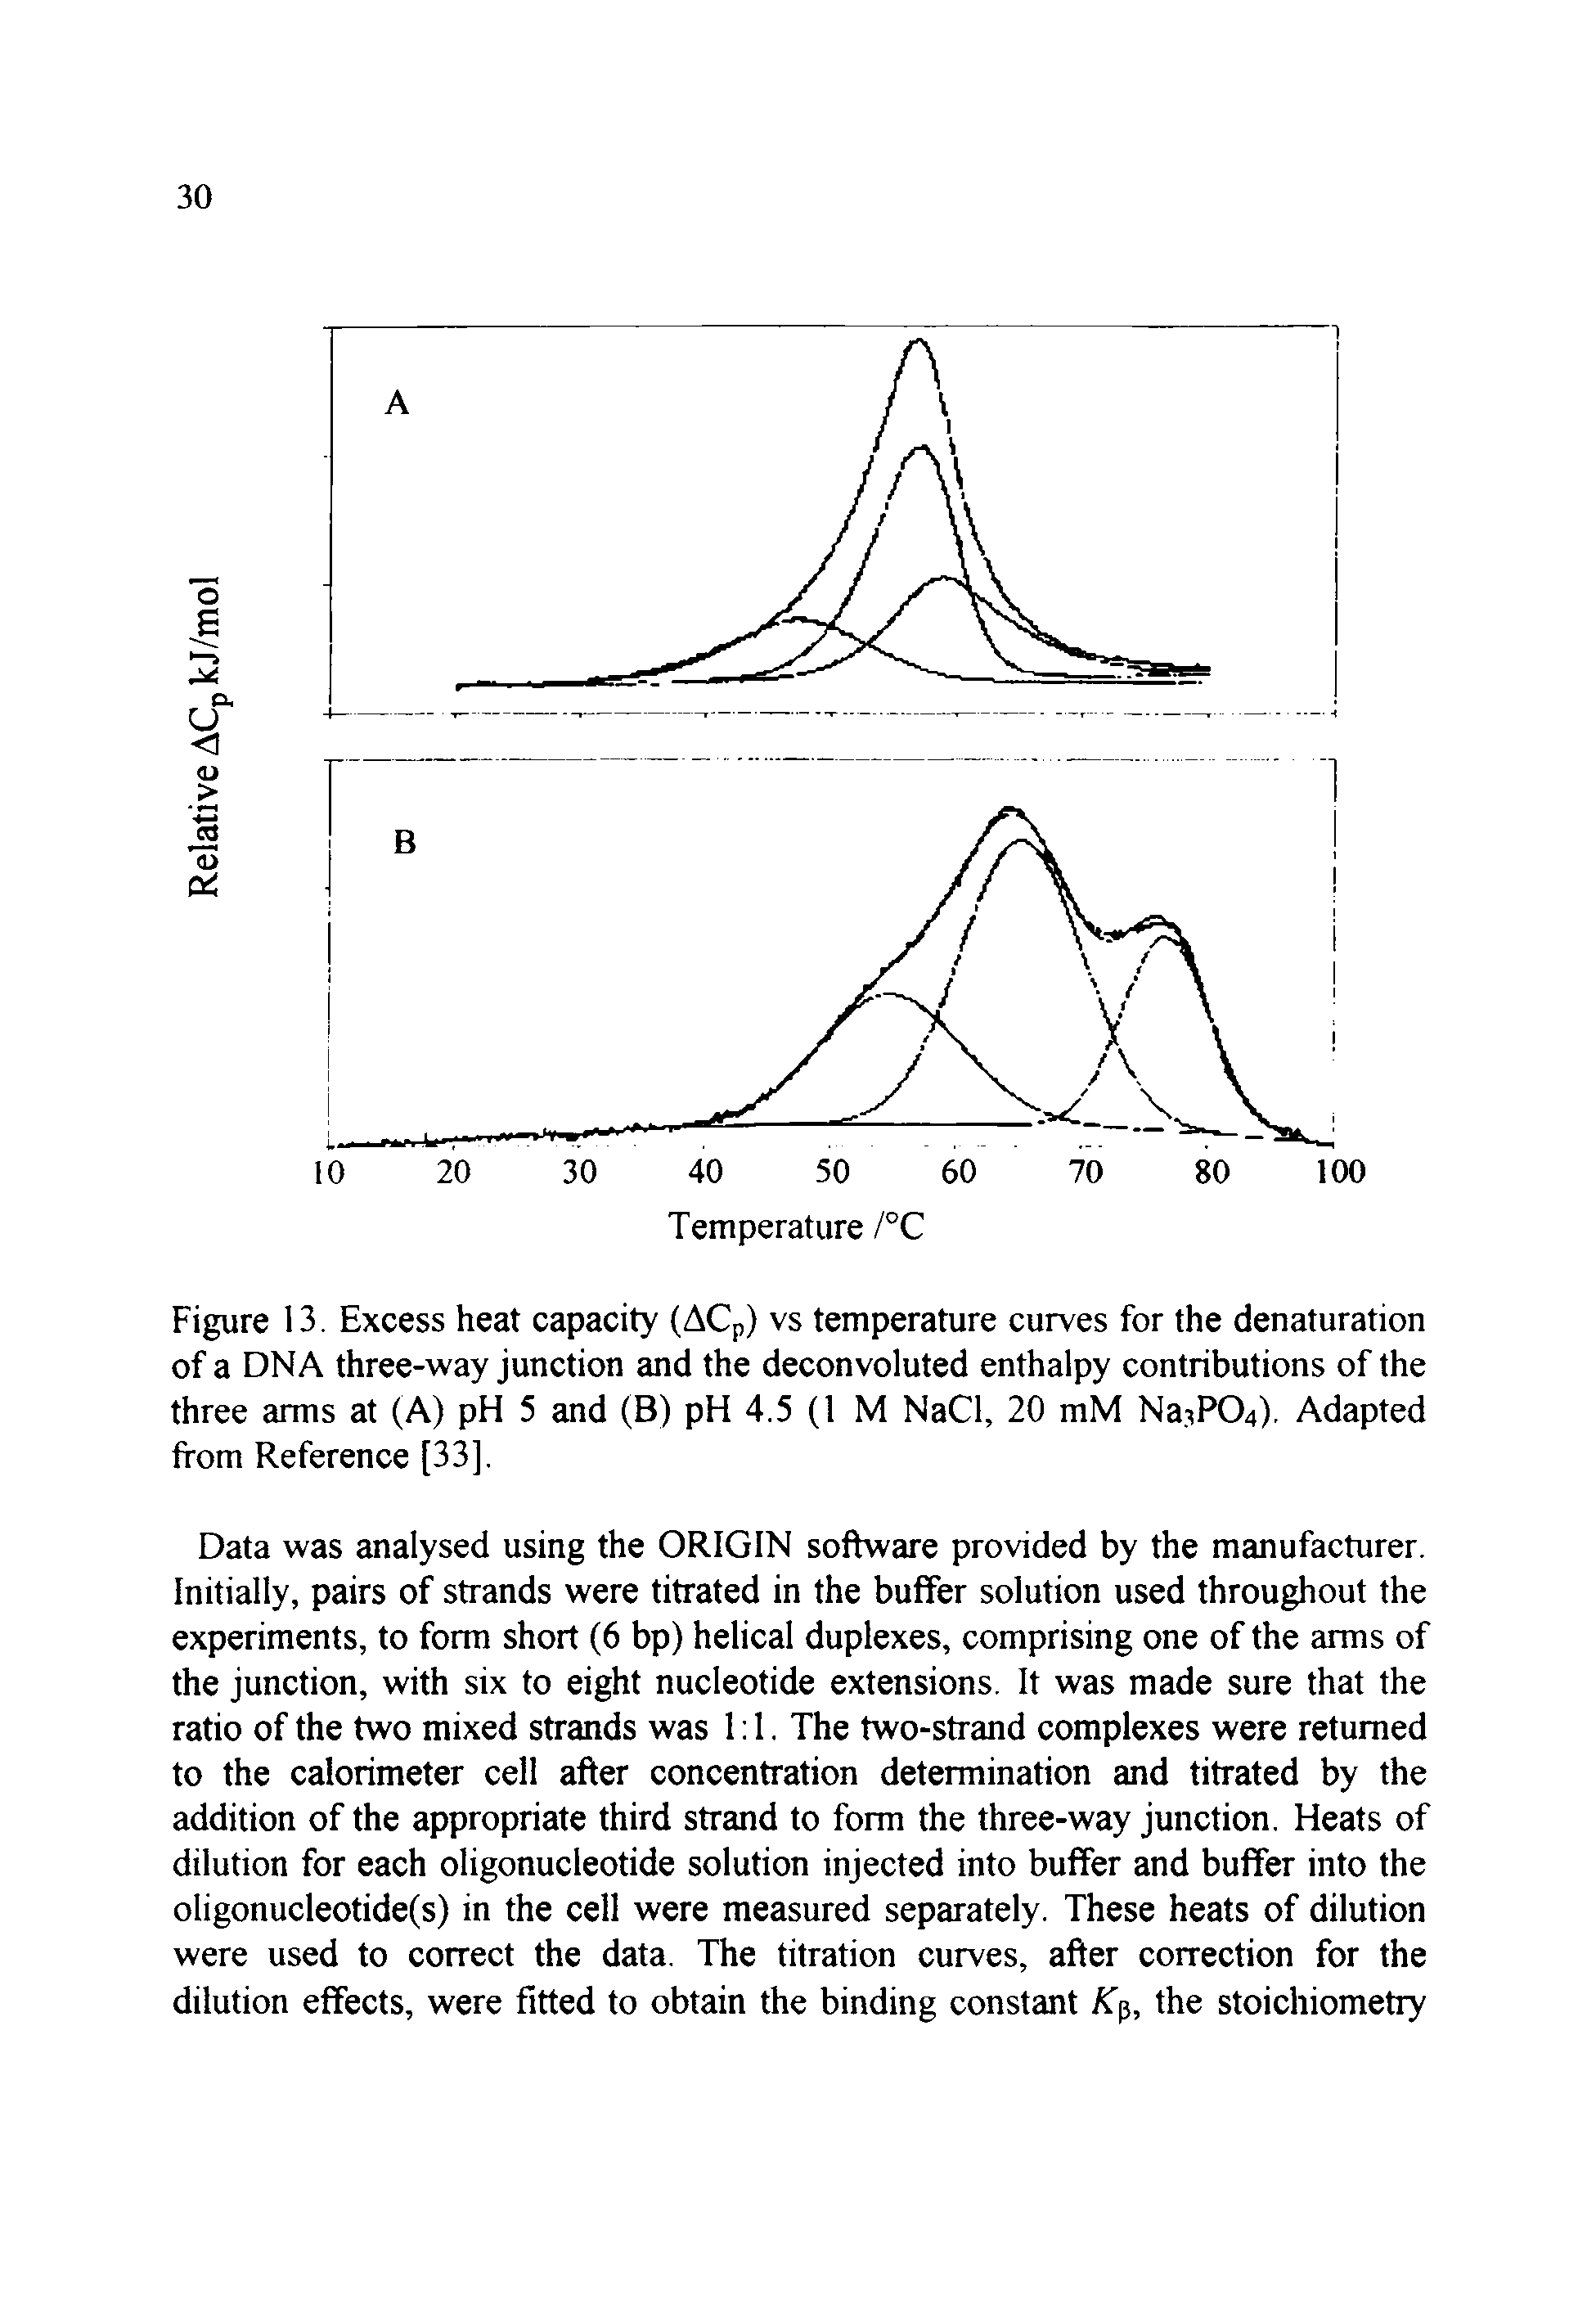 Figure 13. Excess heat capacity (ACp) vs temperature curves for the denaturation of a DNA three-way junction and the deconvoluted enthalpy contributions of the three arms at (A) pH 5 and (B) pH 4.5 (1 M NaCl, 20 mM Na ro4). Adapted from Reference [33],...